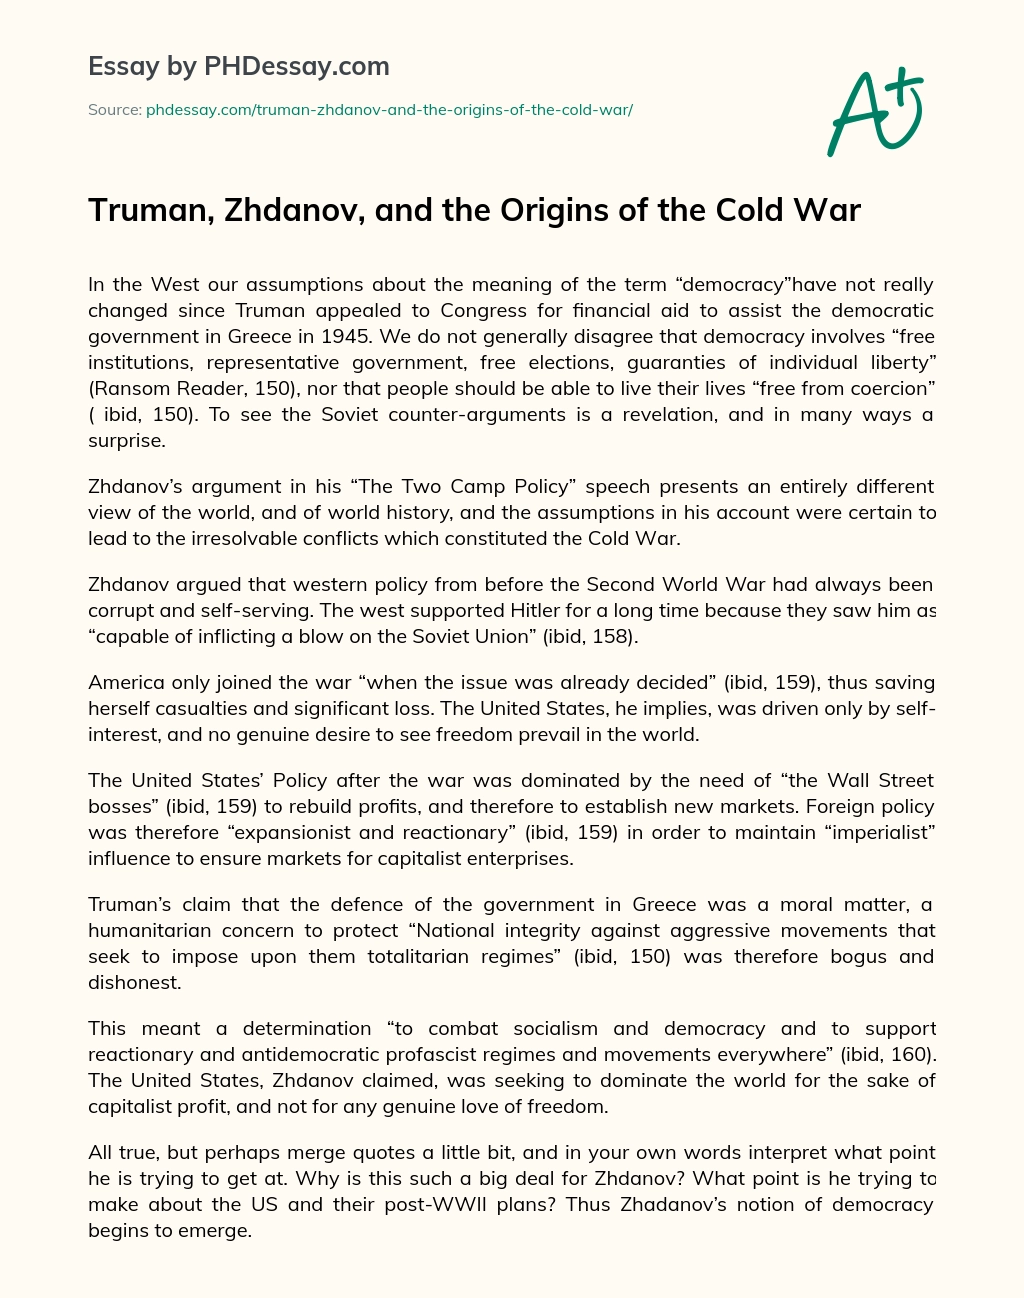 Truman, Zhdanov, and the Origins of the Cold War essay